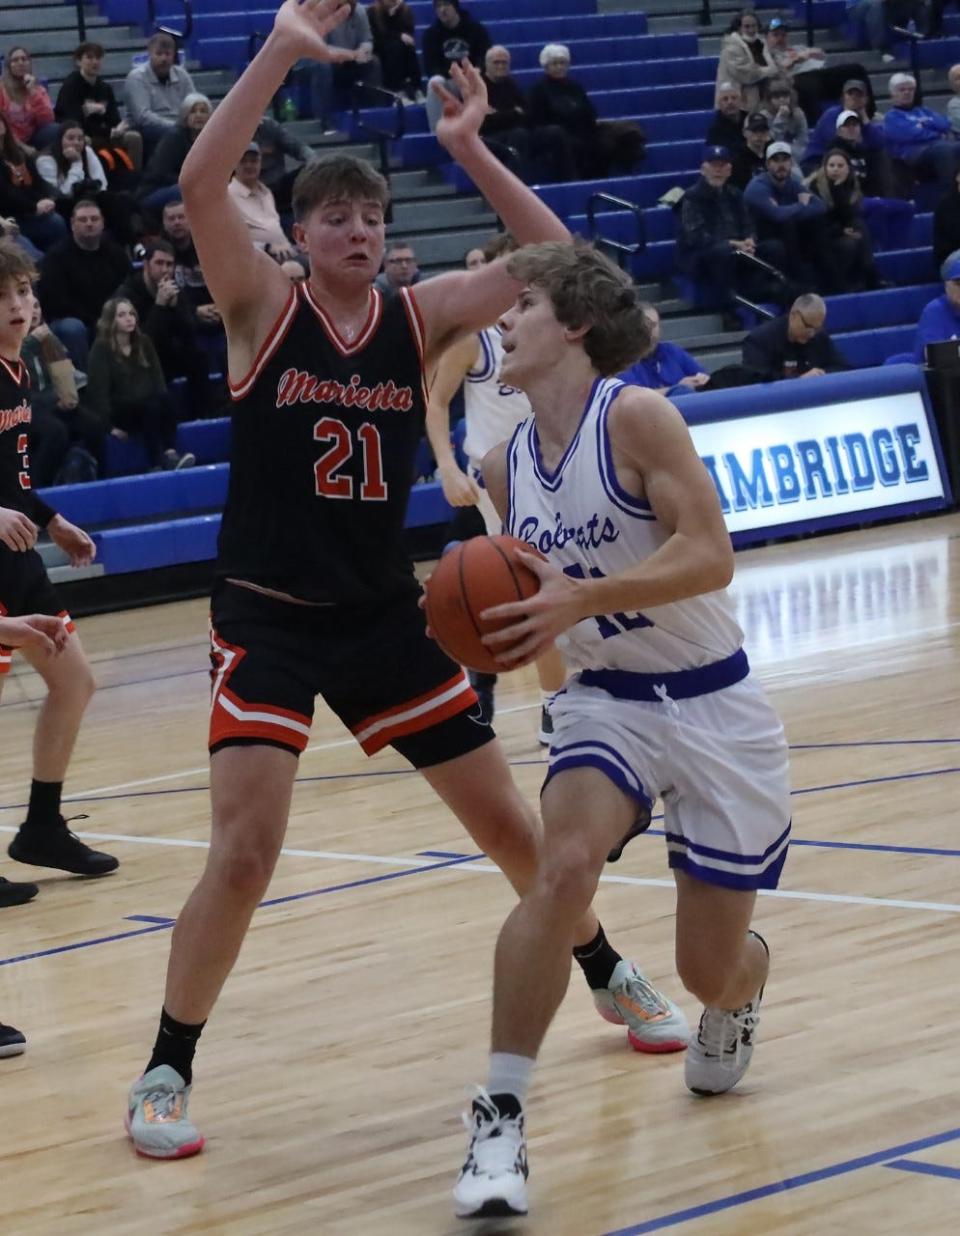 Cambridge junior Devin Ogle (42) looks to make a move on Marietta's 6-7 Alex Kendall during Friday's non-league action inside Gene Ford Gymnasium.